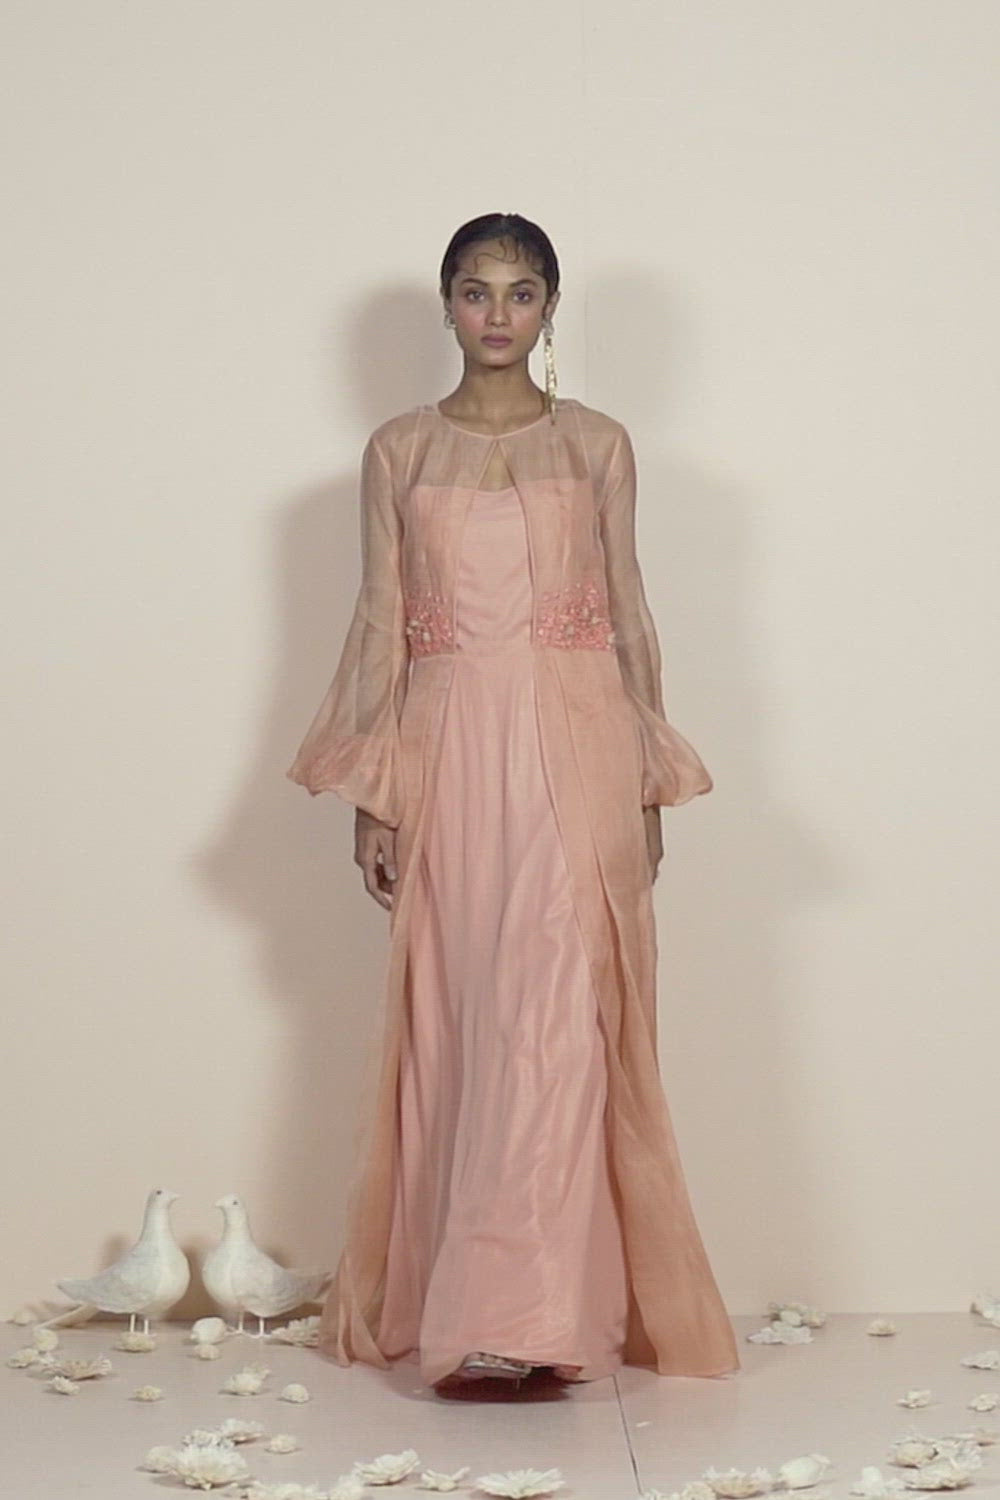 Maher Peach Gown